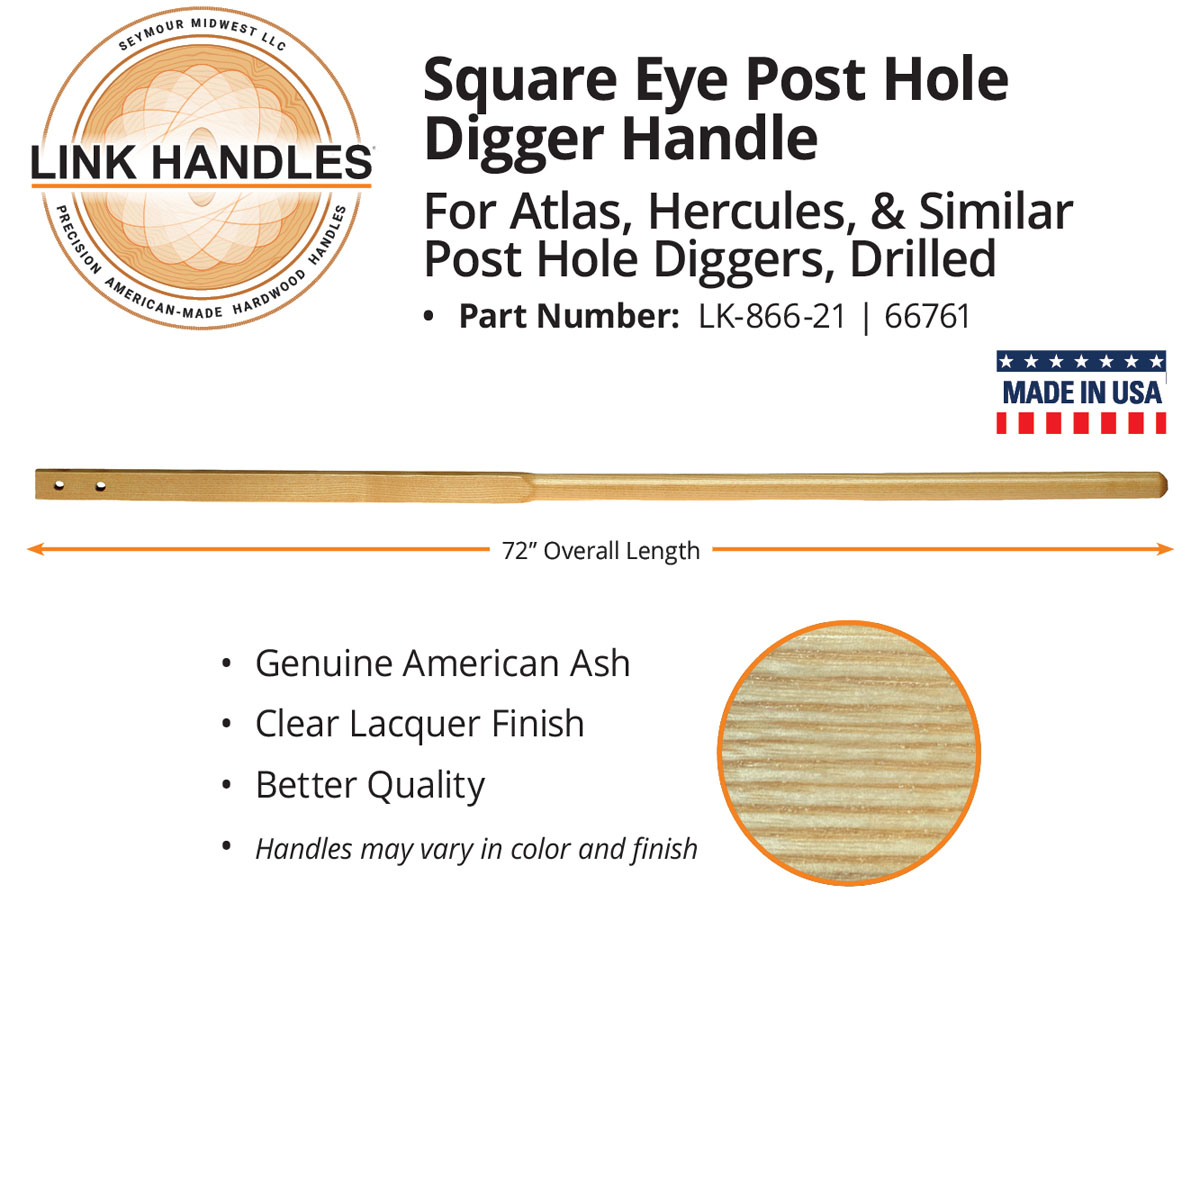 Posthole Diggers 72" Square eye Handle for Atlas, Hercules, and similar posthole diggers,  drilled